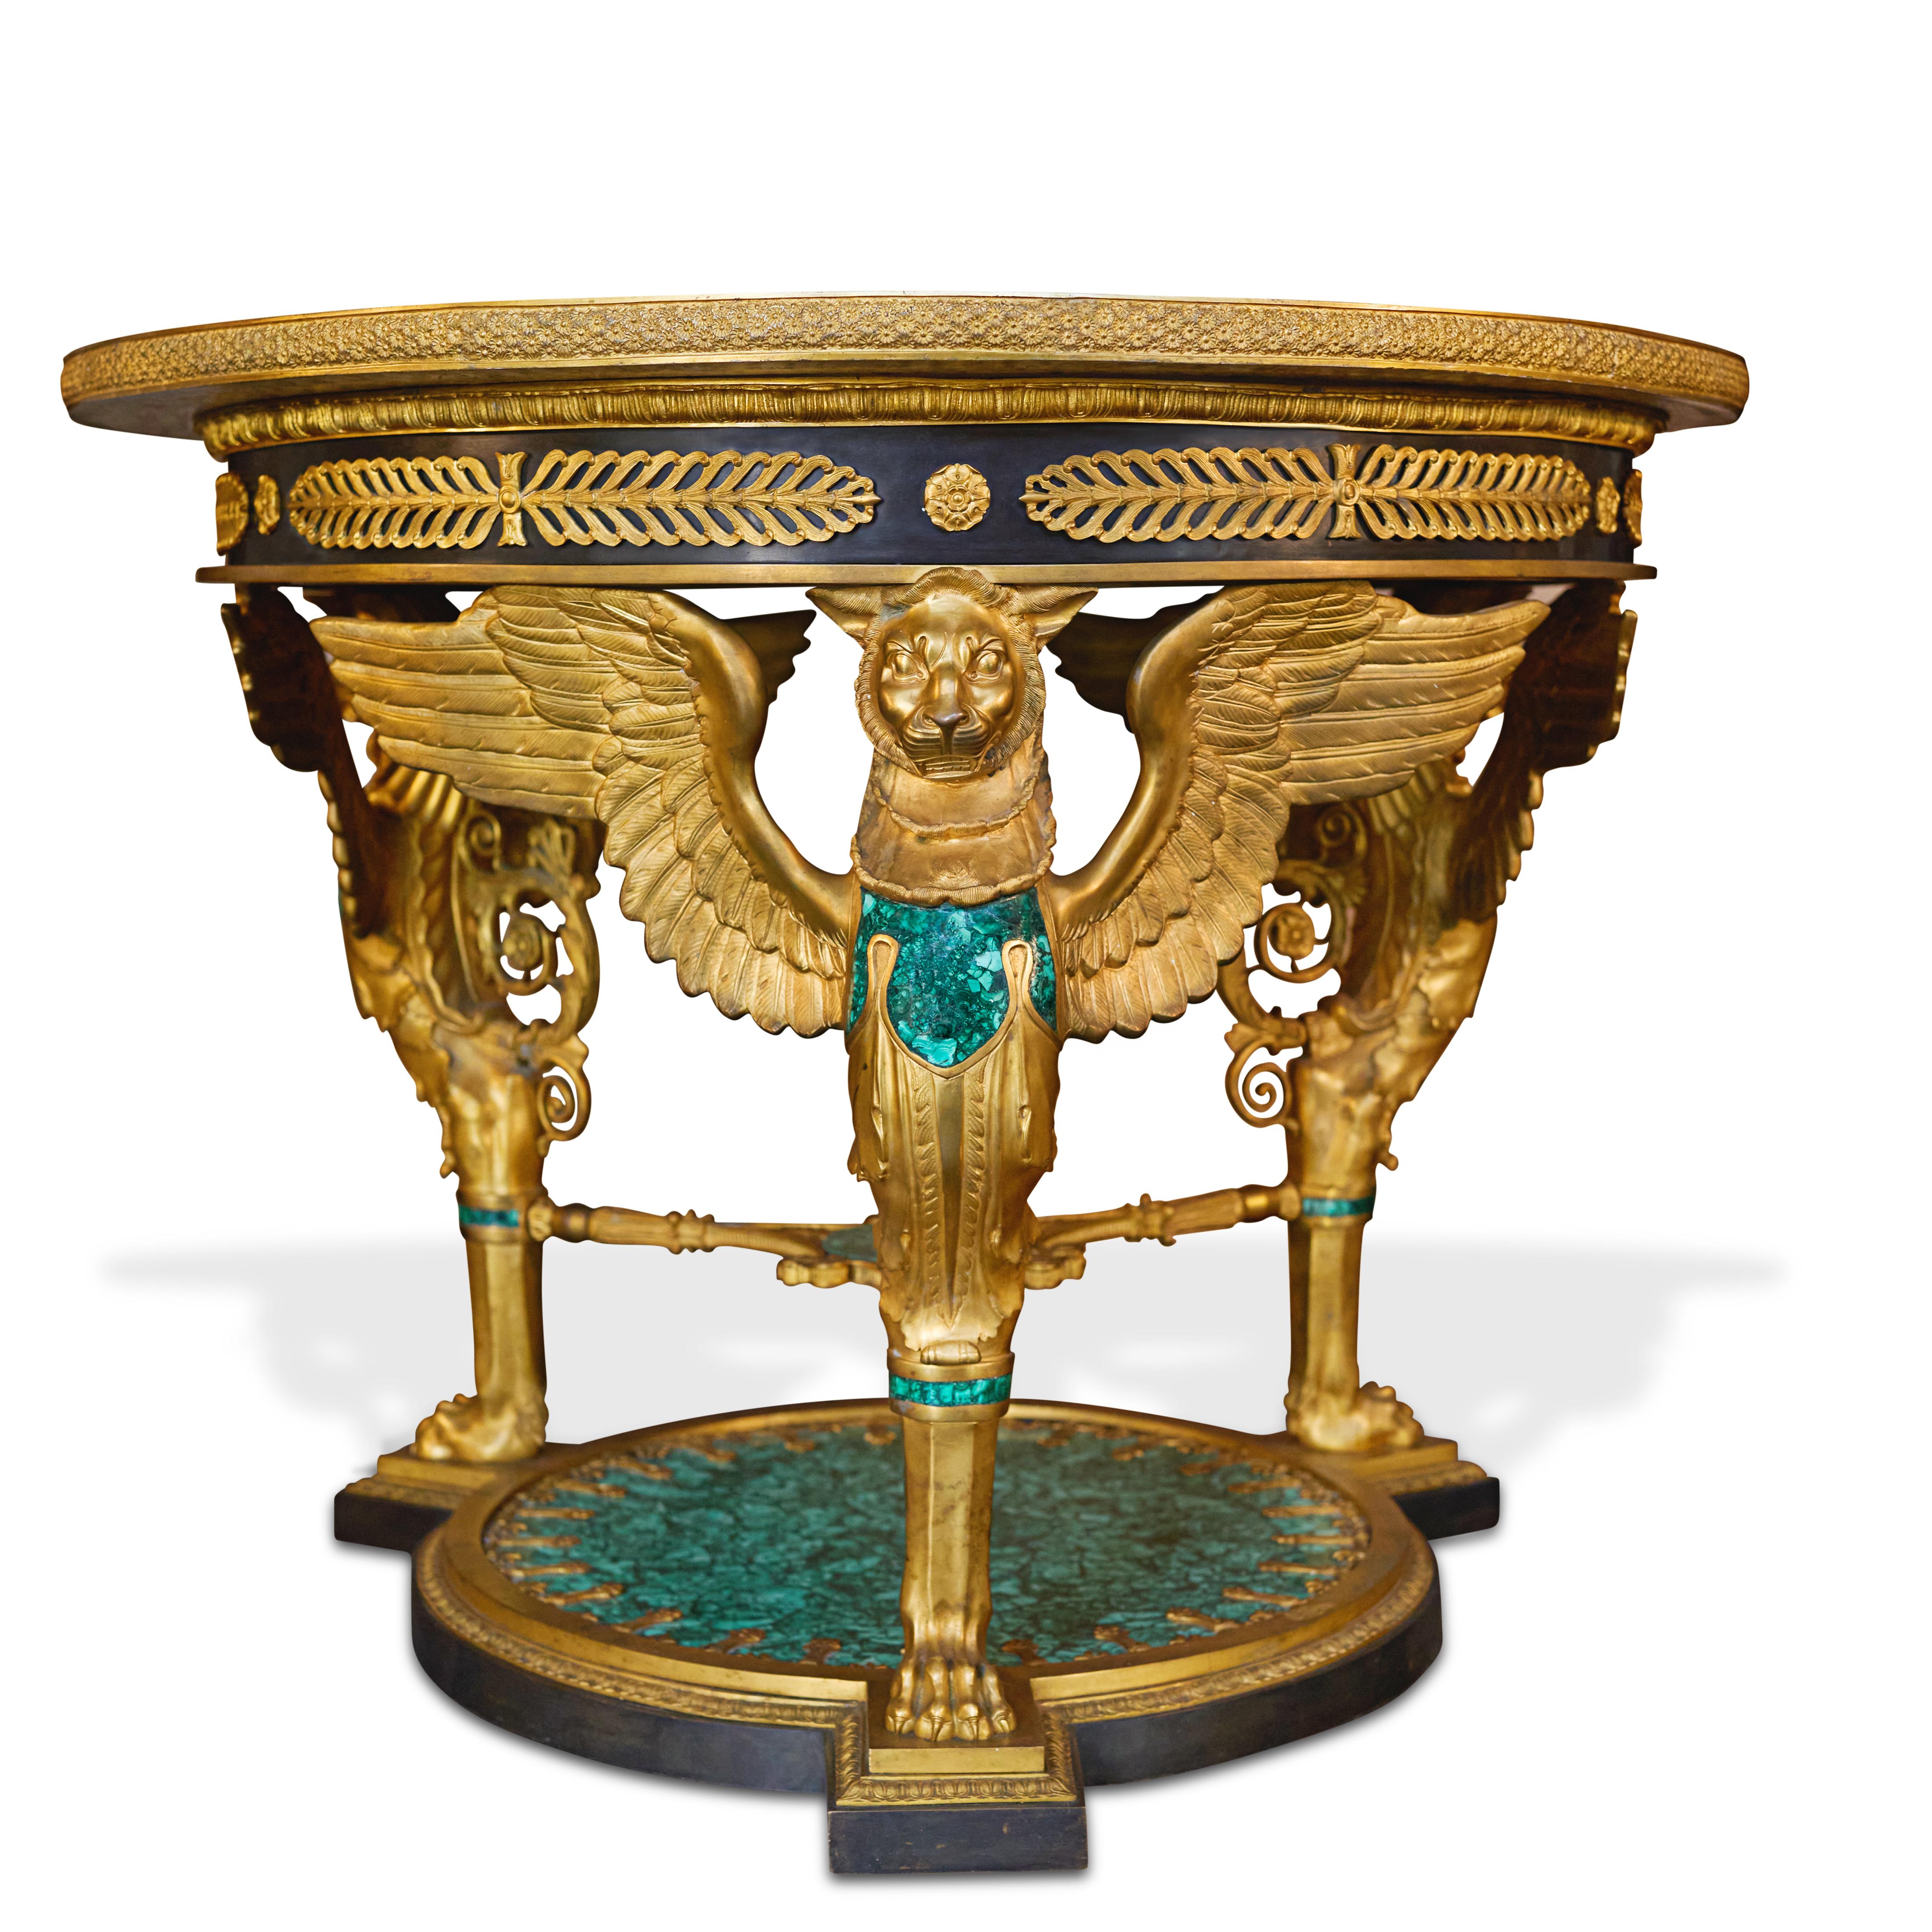 A large and impressive Empire style Gilt Bronze & Malachite center table. The table features a circular top, which has been beautifully inlaid with malachite and edged with gilt bronze, above a frieze featuring alternating rosettes and anthemia,